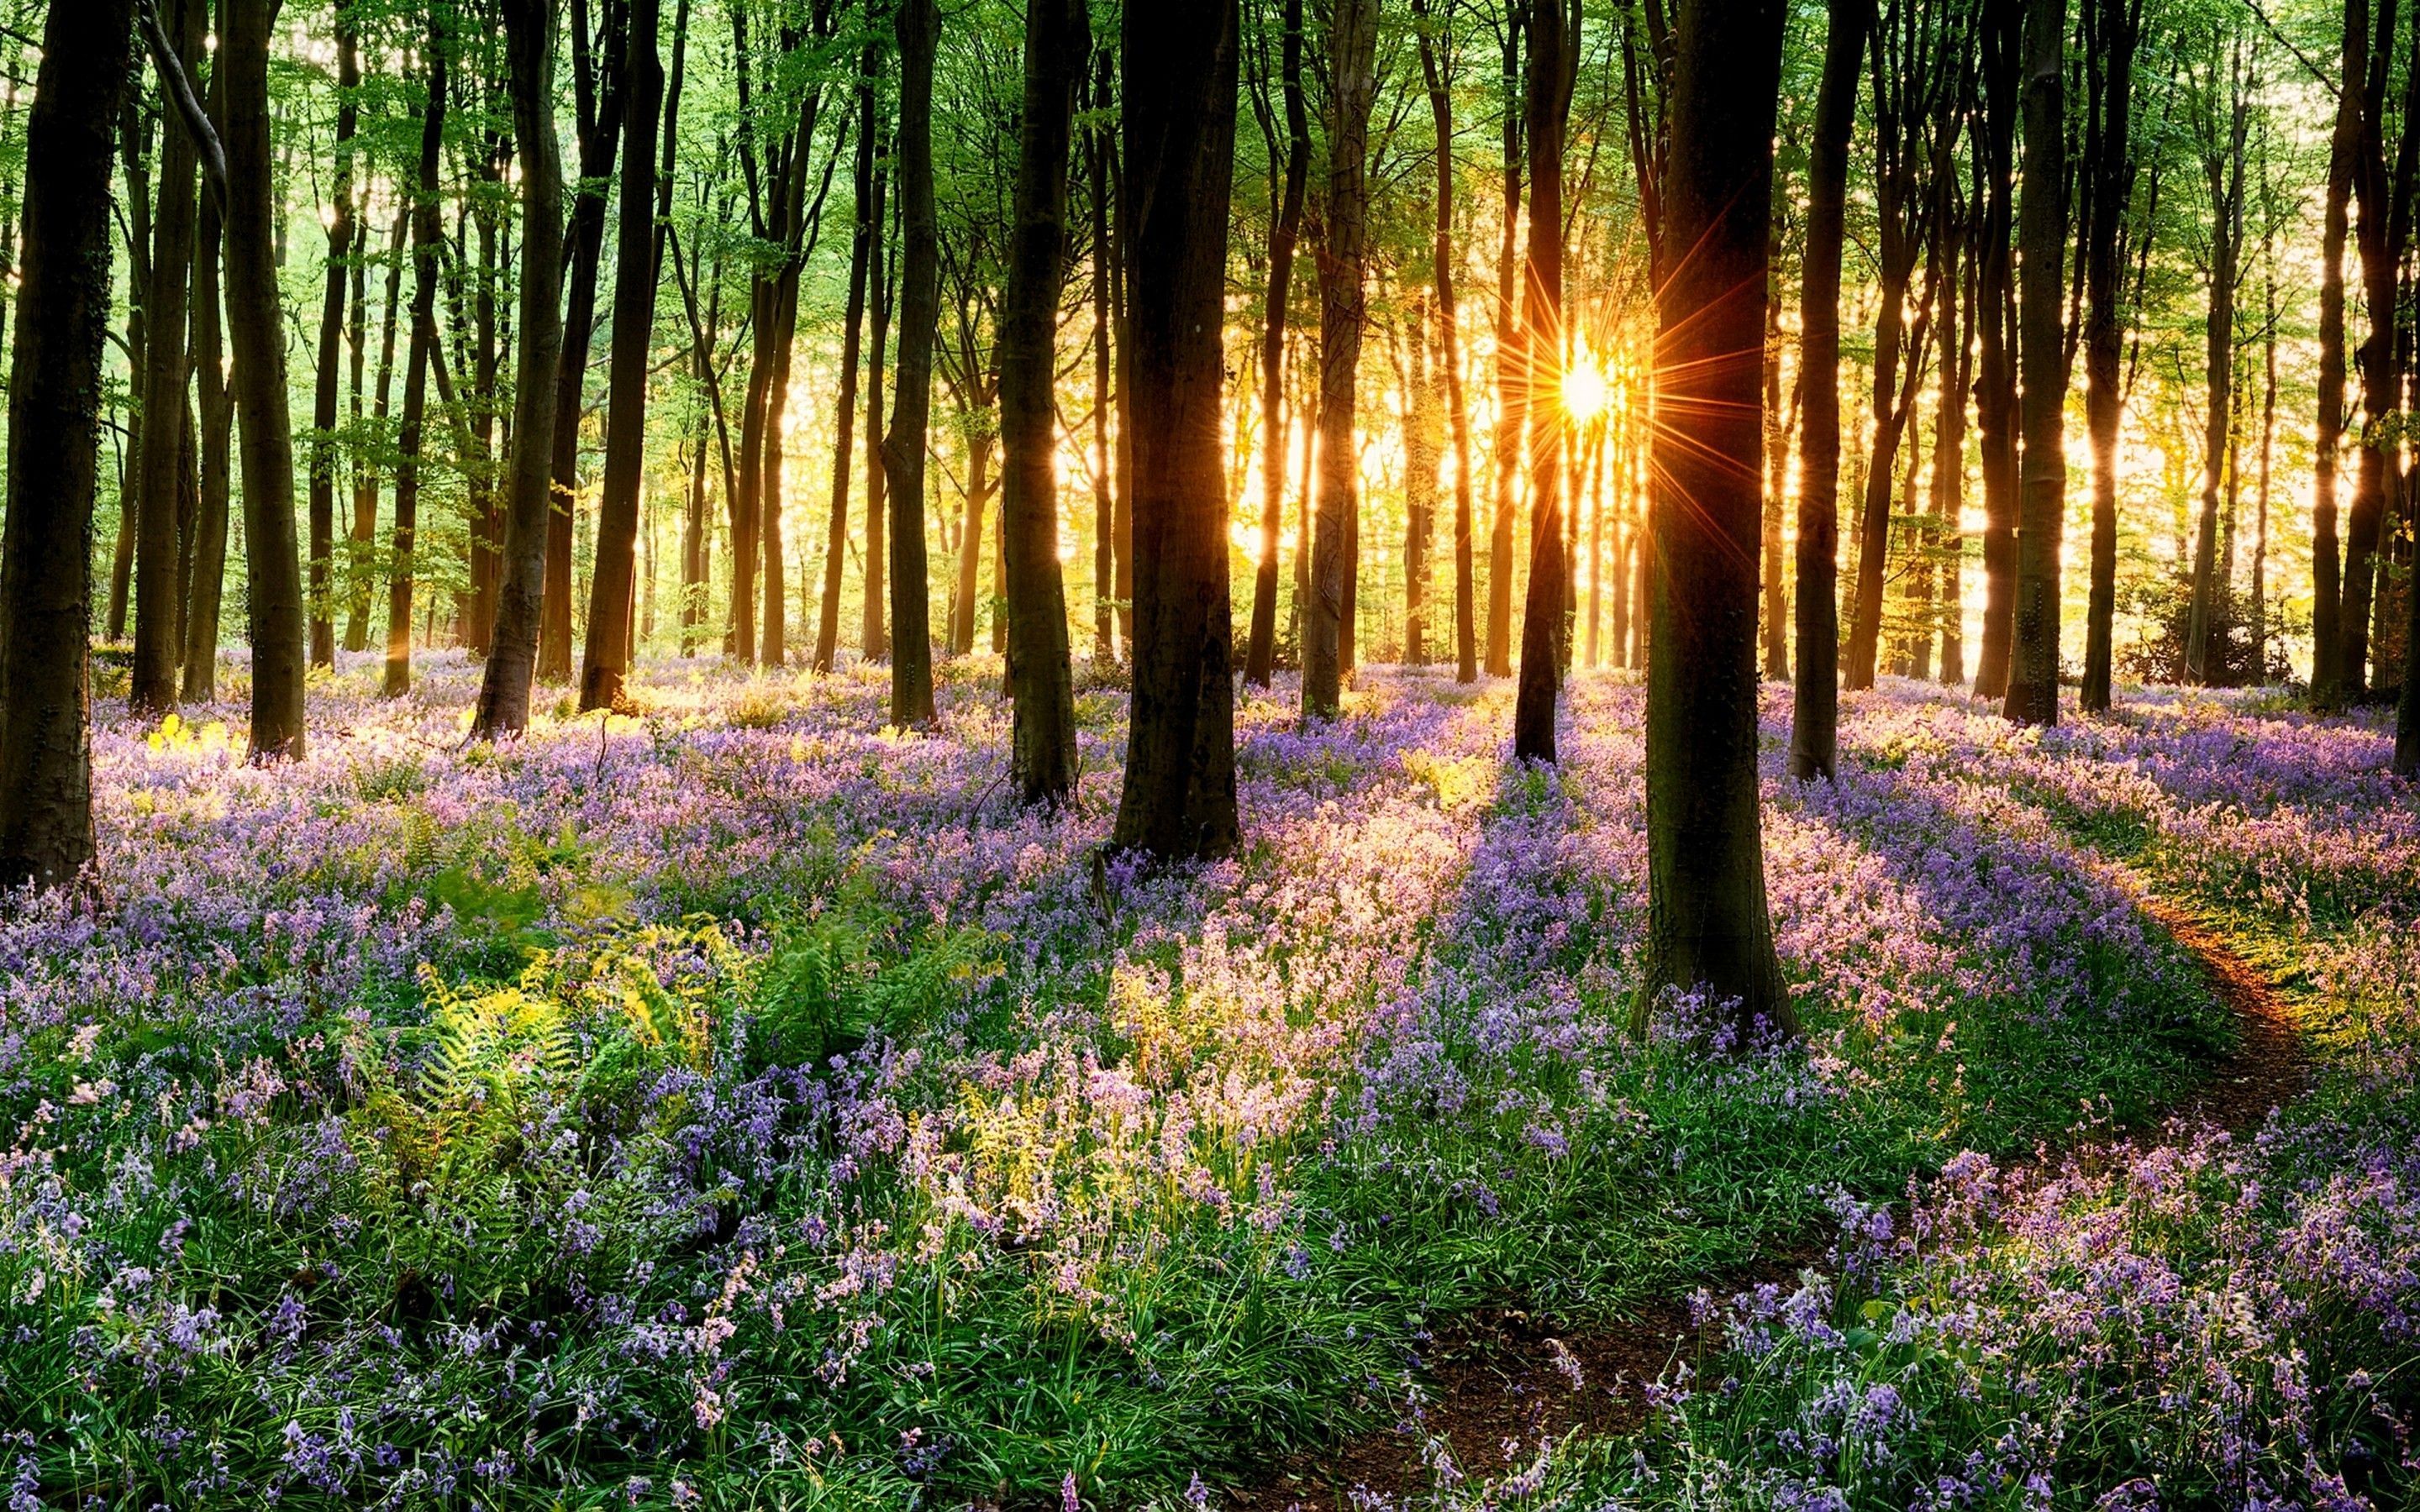 Forests Flower Forest Sunshine Carpet Sunset Spring Nature Purple Grass Flowers Sun Trees Wallpaper National Geographic. Spring forest, Forest sunset, Outdoor